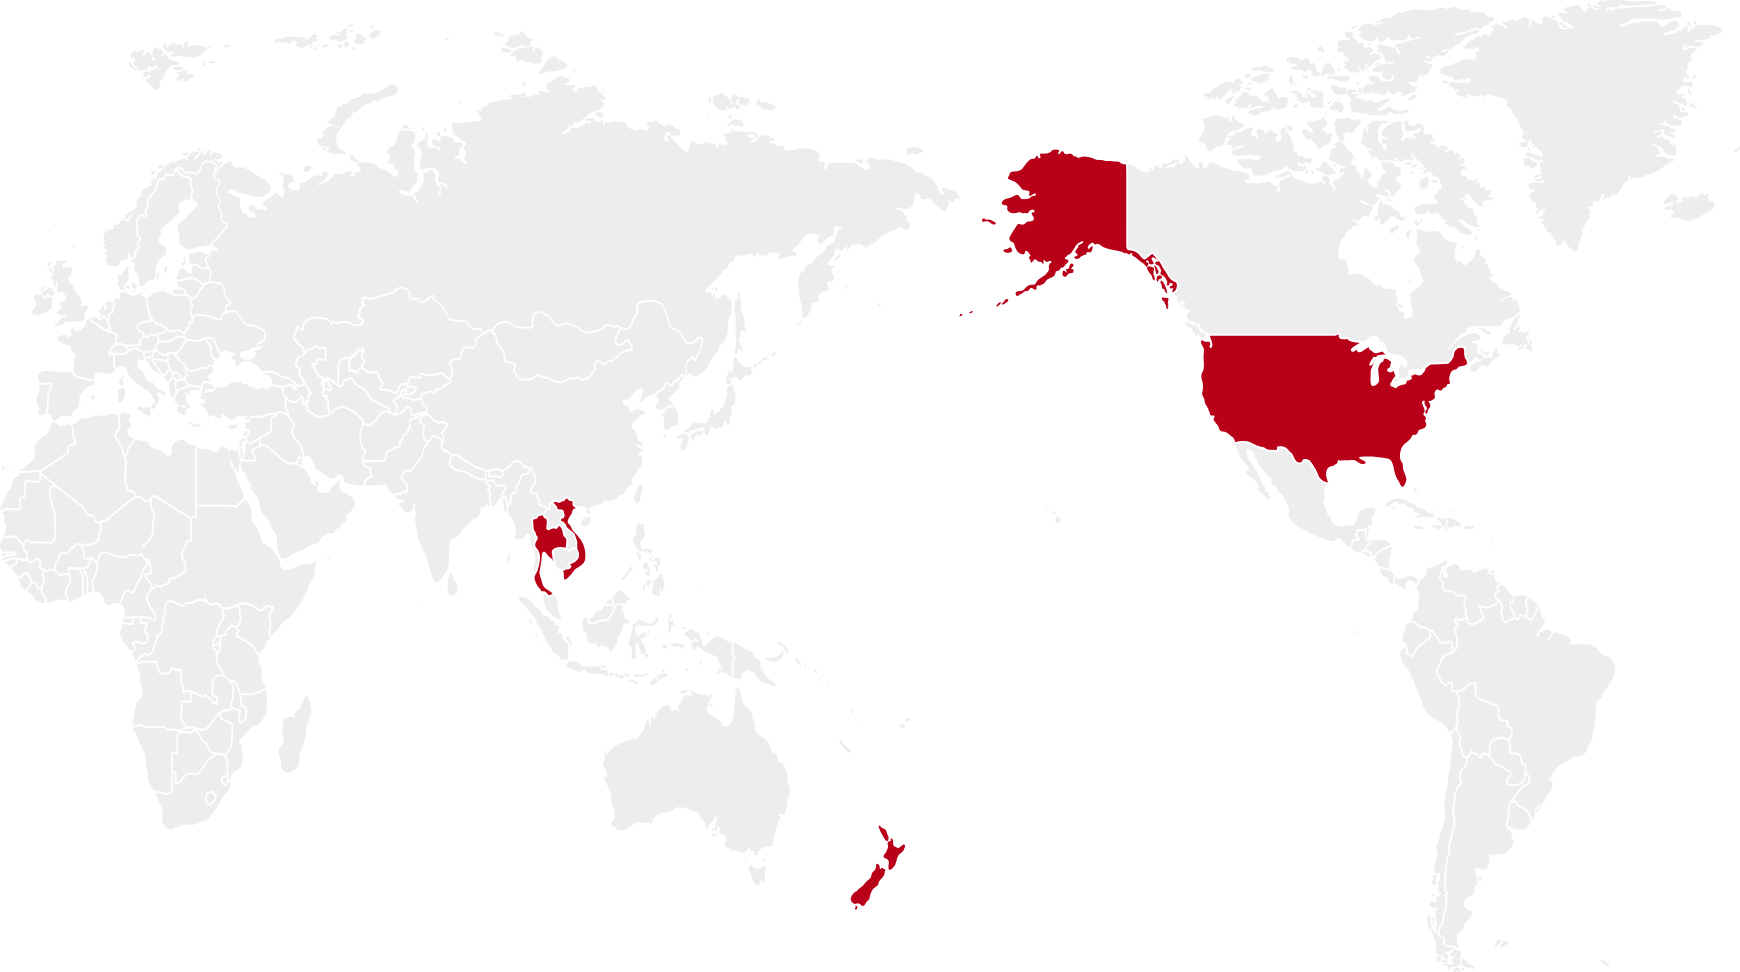 World map with New Zealand, Thailand, Malaysia and USA highlighted